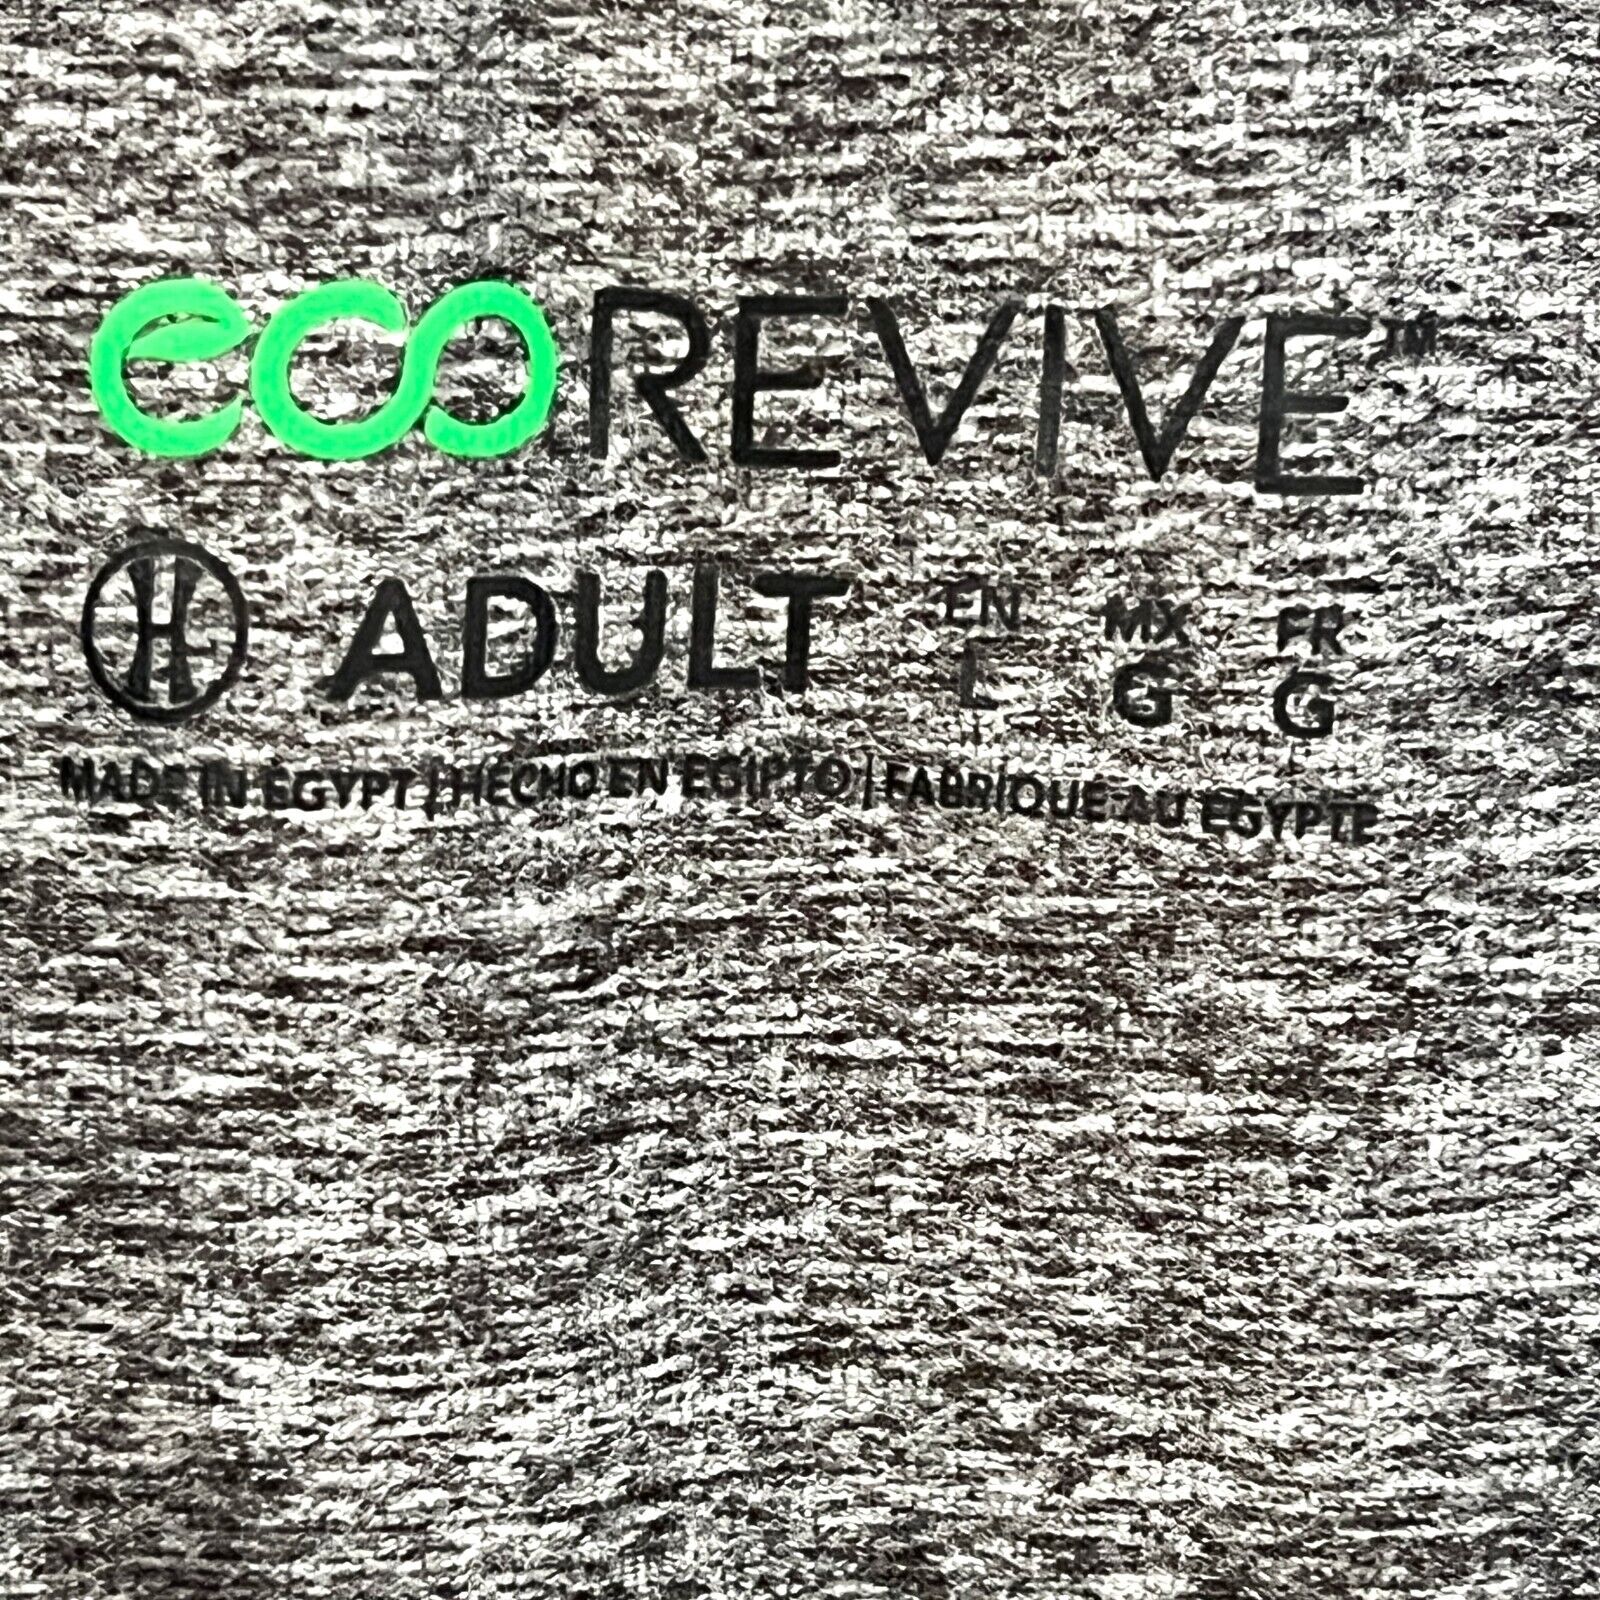 NEW Holloway Eco Revive Ventura Soft Knit Crew in Carbon Heather Gray Large